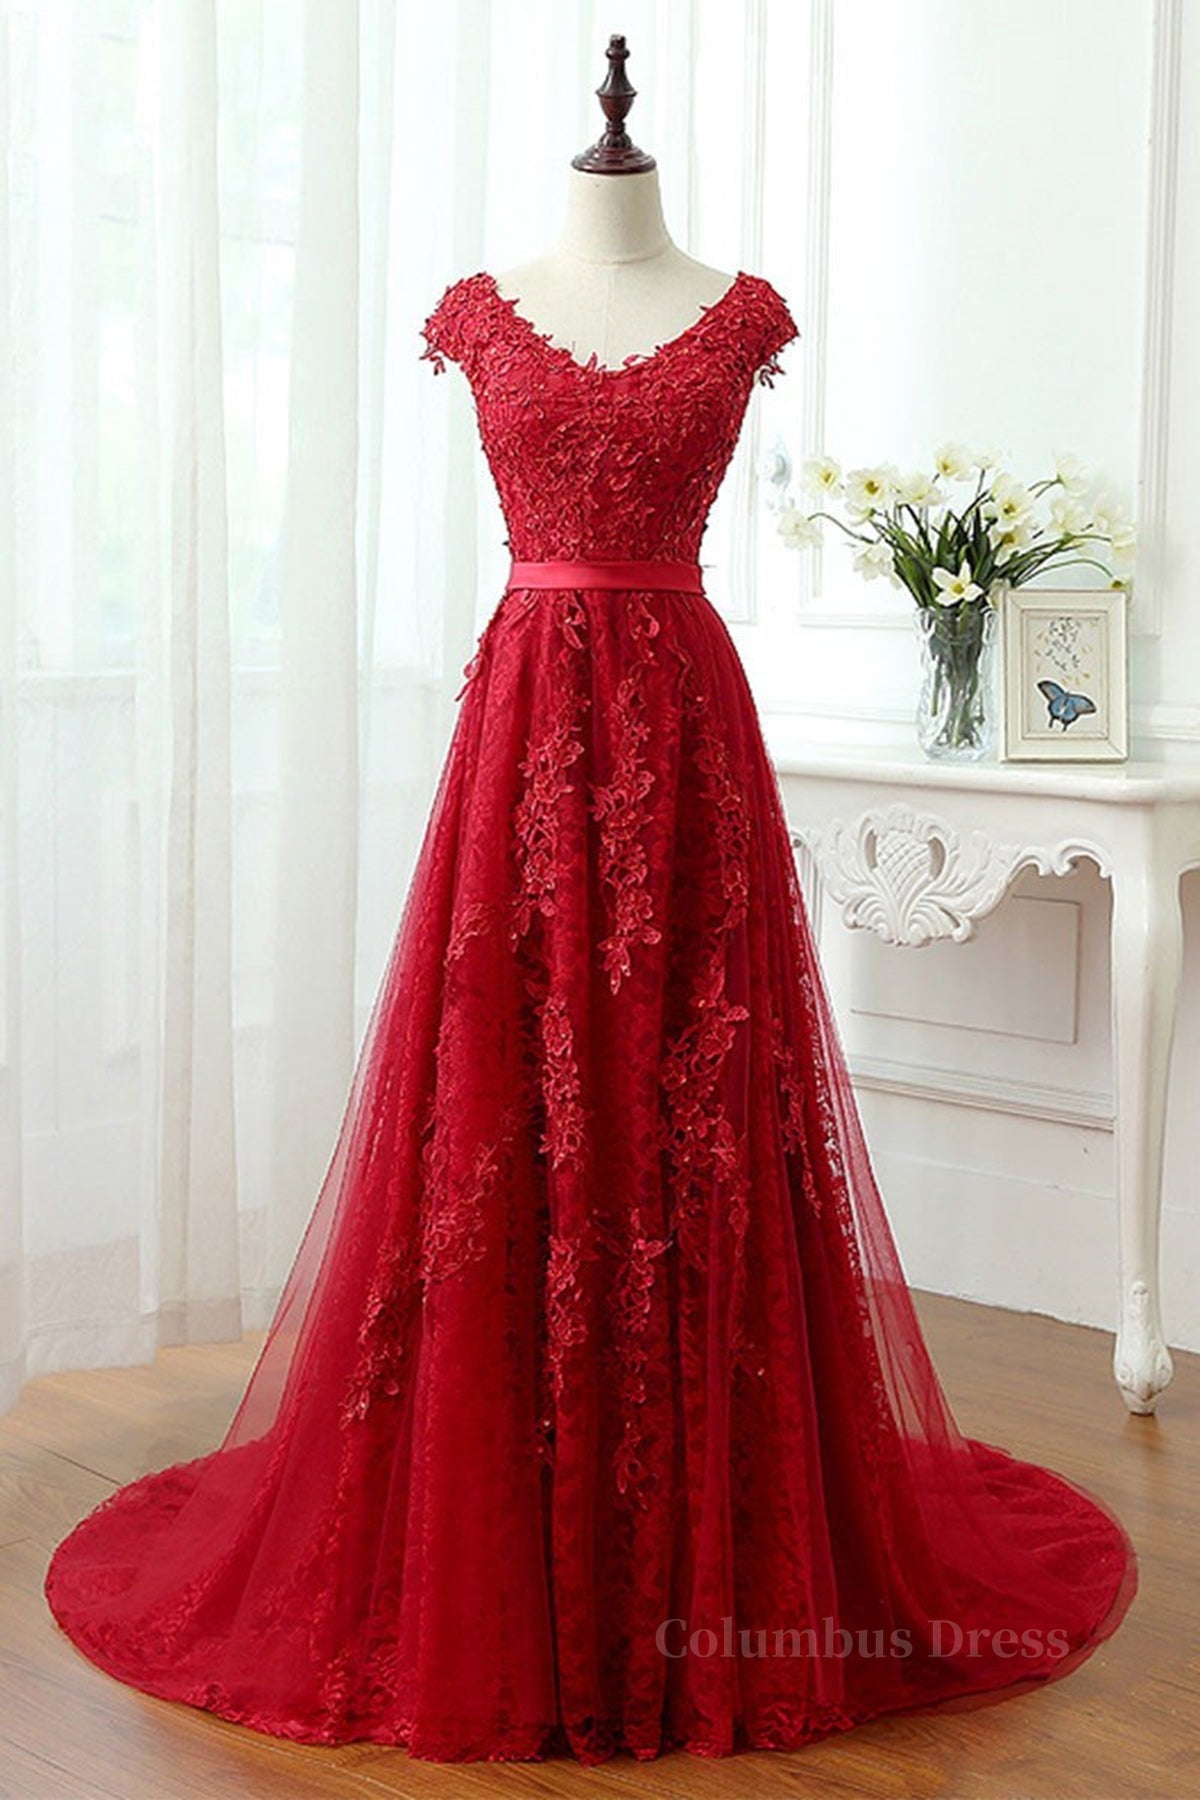 Simple Dress, Burgundy Lace Prom Dresses with Train, Wine Red Lace Formal Evening Dresses